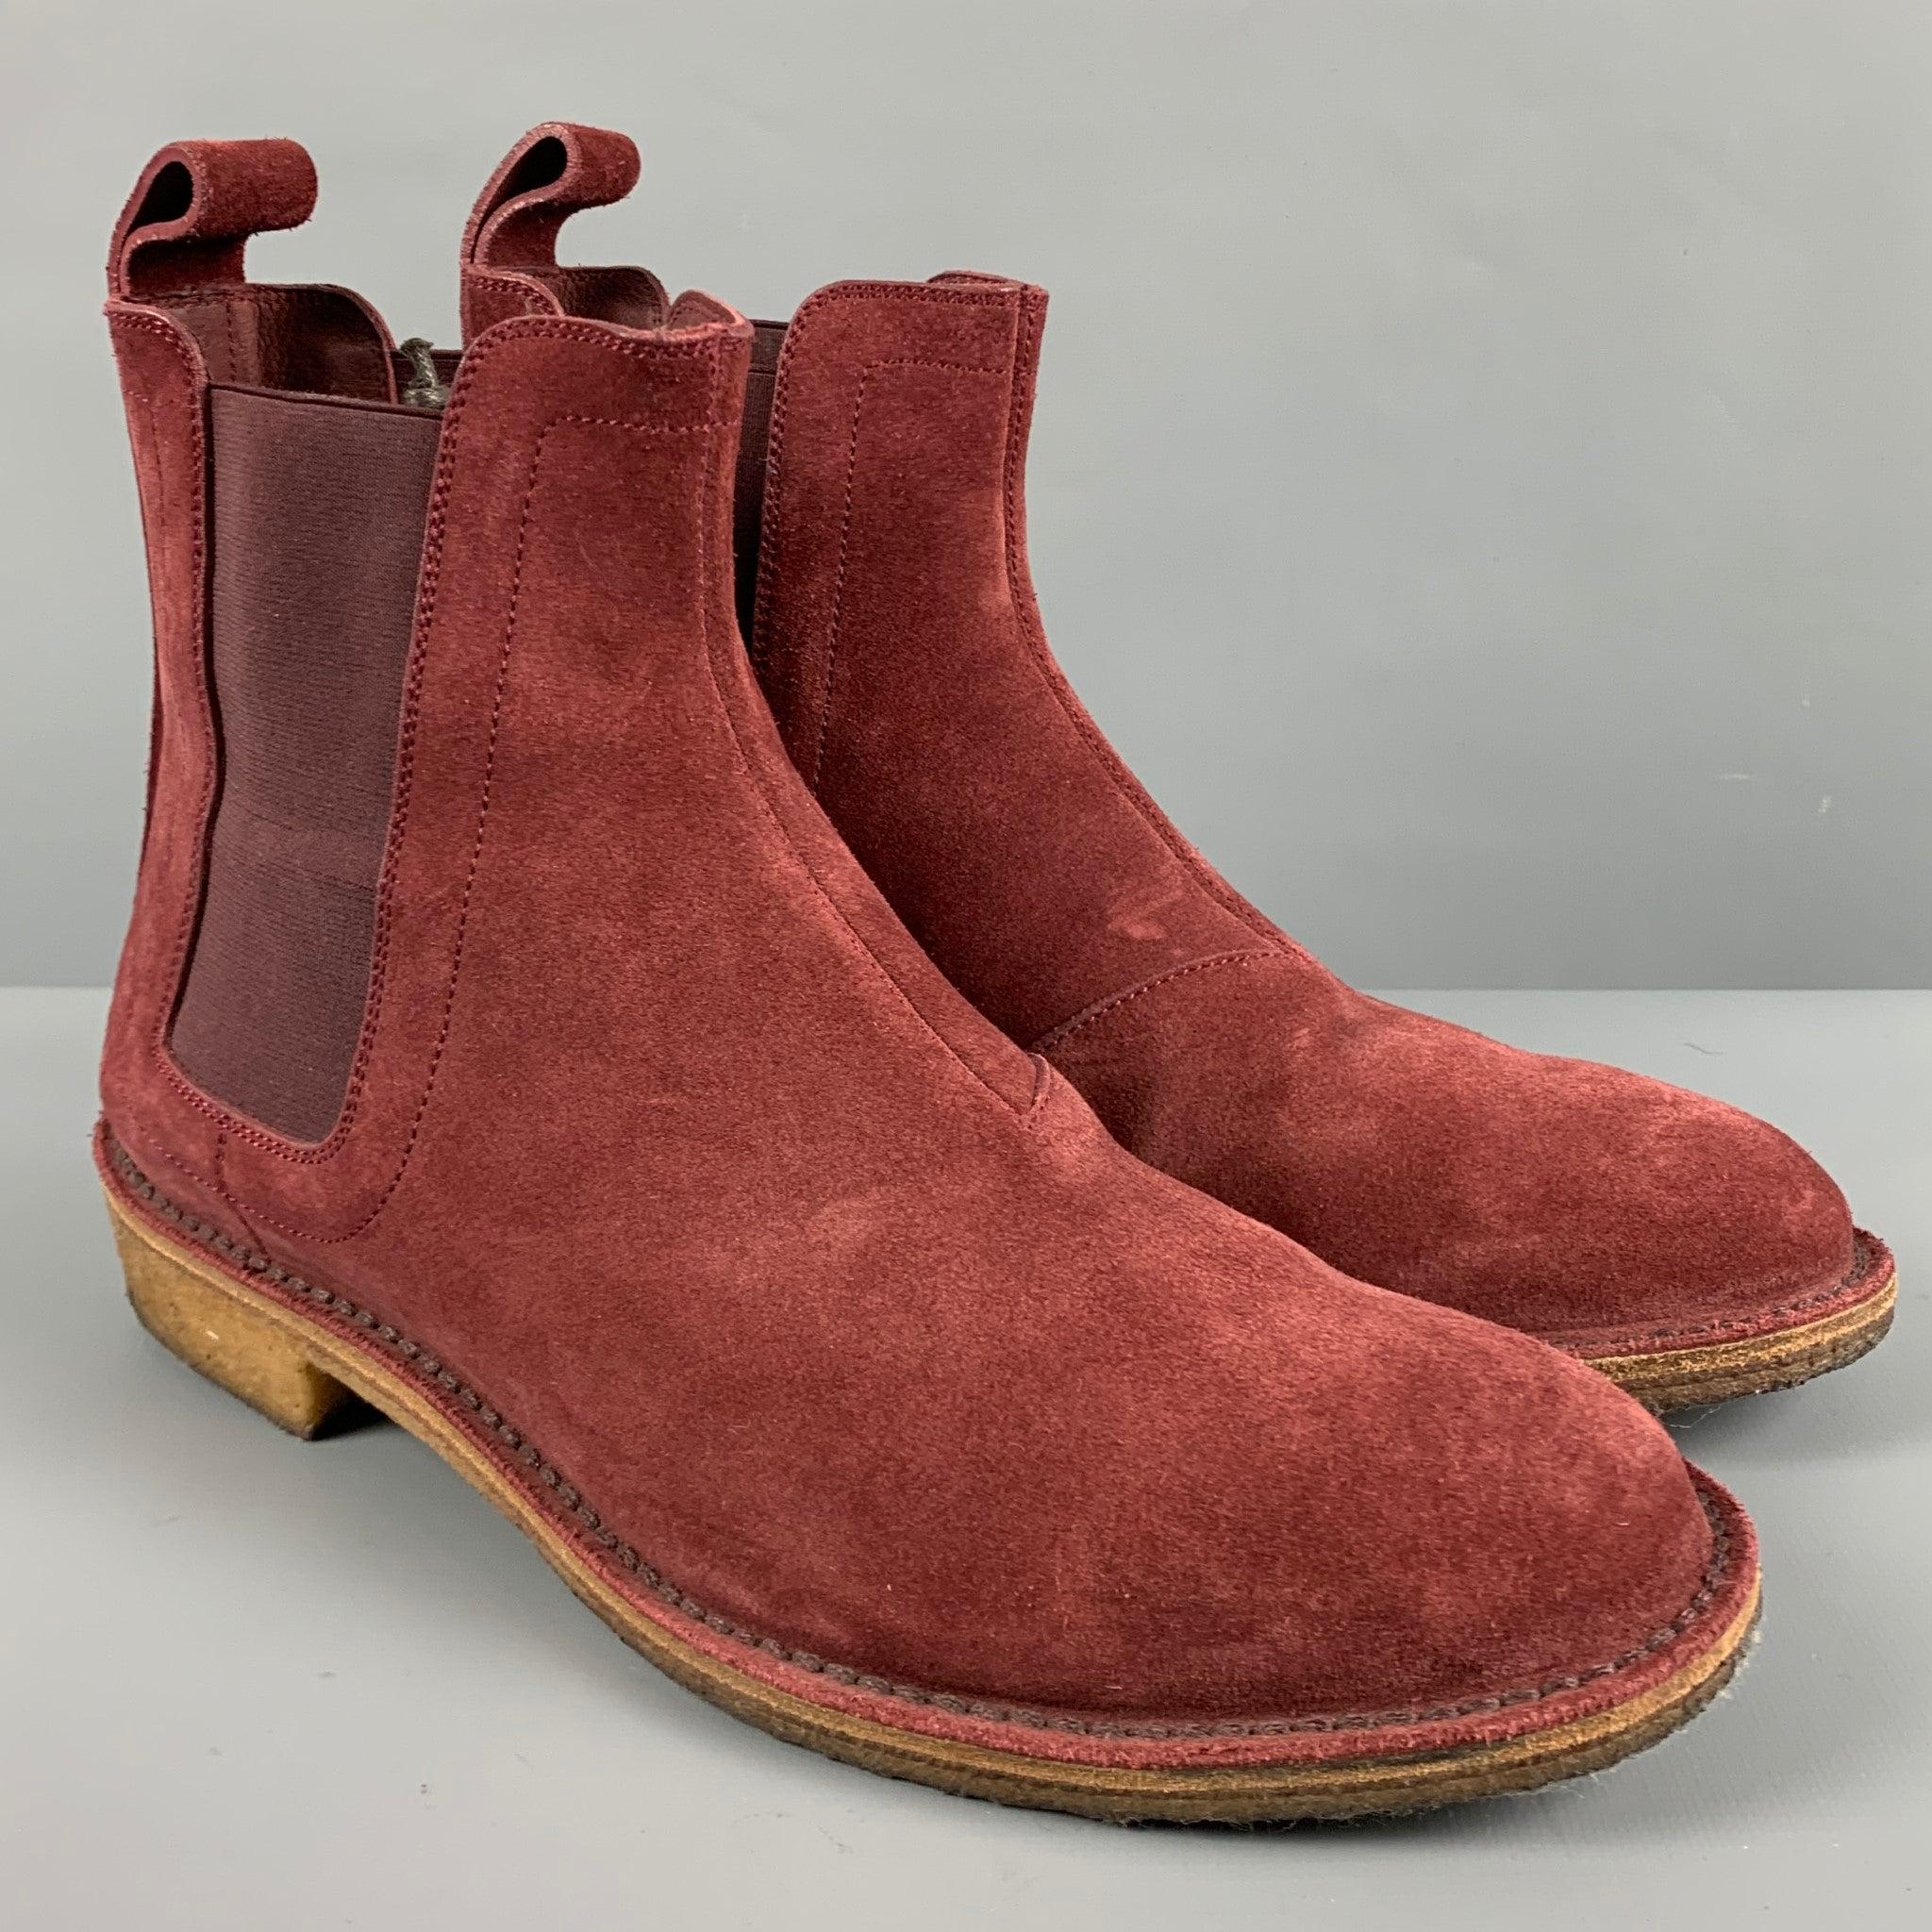 BOTTEGA VENETA boots
in a burgundy suede featuring a Chelsea style with elastic panels. Comes with dust bag. Made in Italy. Very Good Pre-Owned Condition. Minor signs of wear. 

Marked:   40.5 

Measurements: 
  Length: 11.5 inches Width: 4 inches